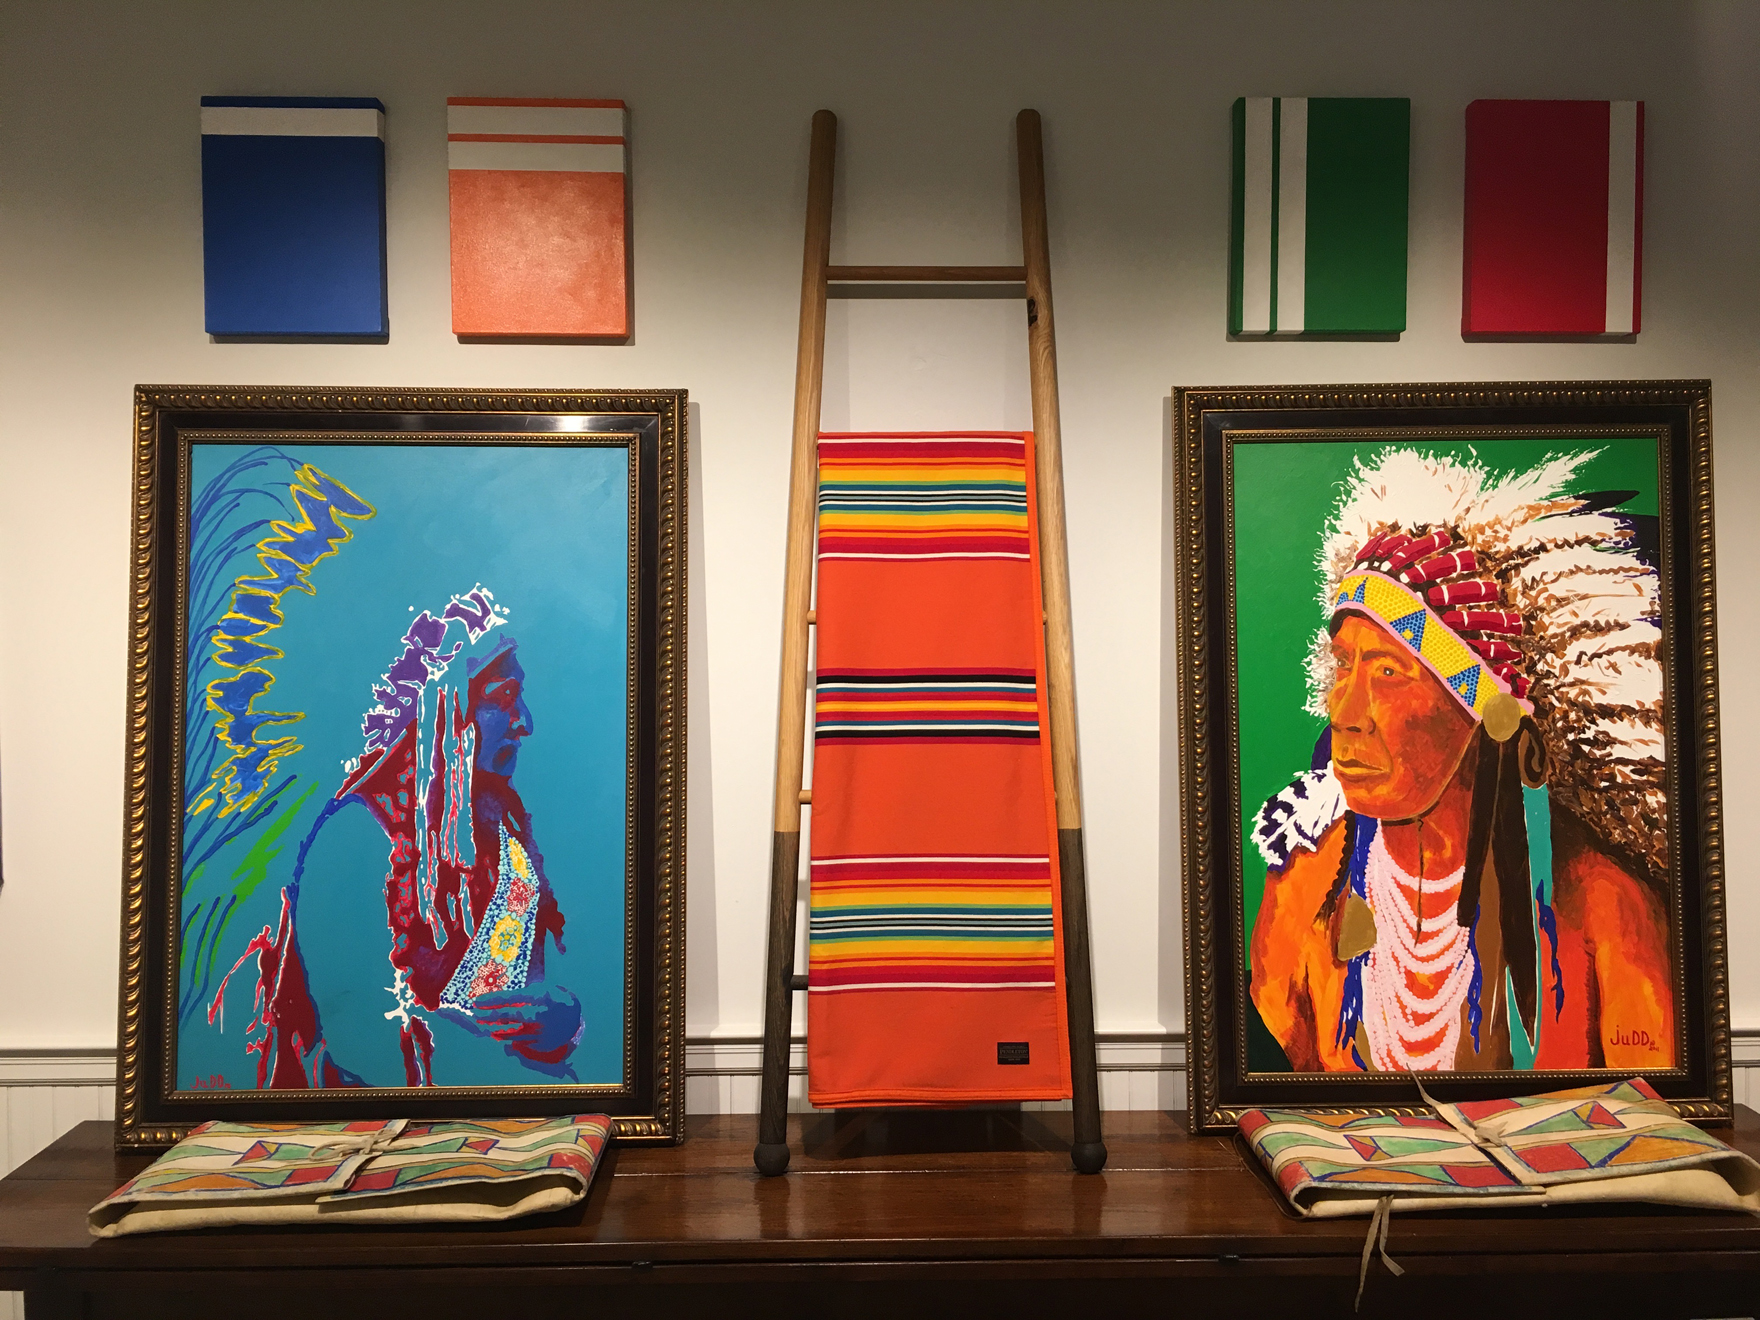 Stapleton Gallery owner Jeremiah Young recognized Pendleton influences in Judd Thompson’s work and created an exhibit around the concept in 2017.